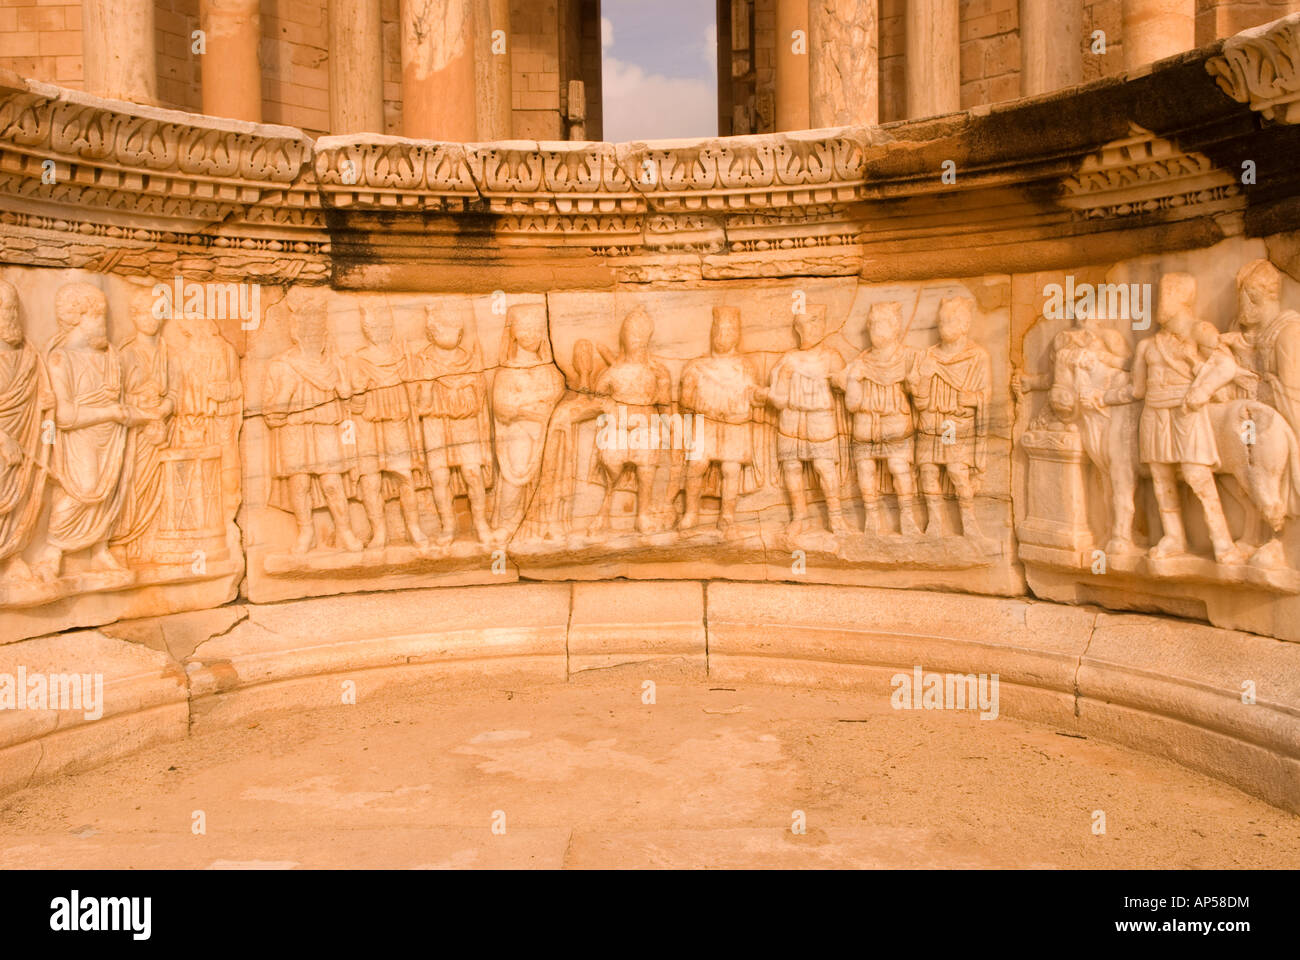 Niches in front of the Theatre depicting Roman military figures and scenes of sacrifice Sabratha, Libya, North Africa. Stock Photo